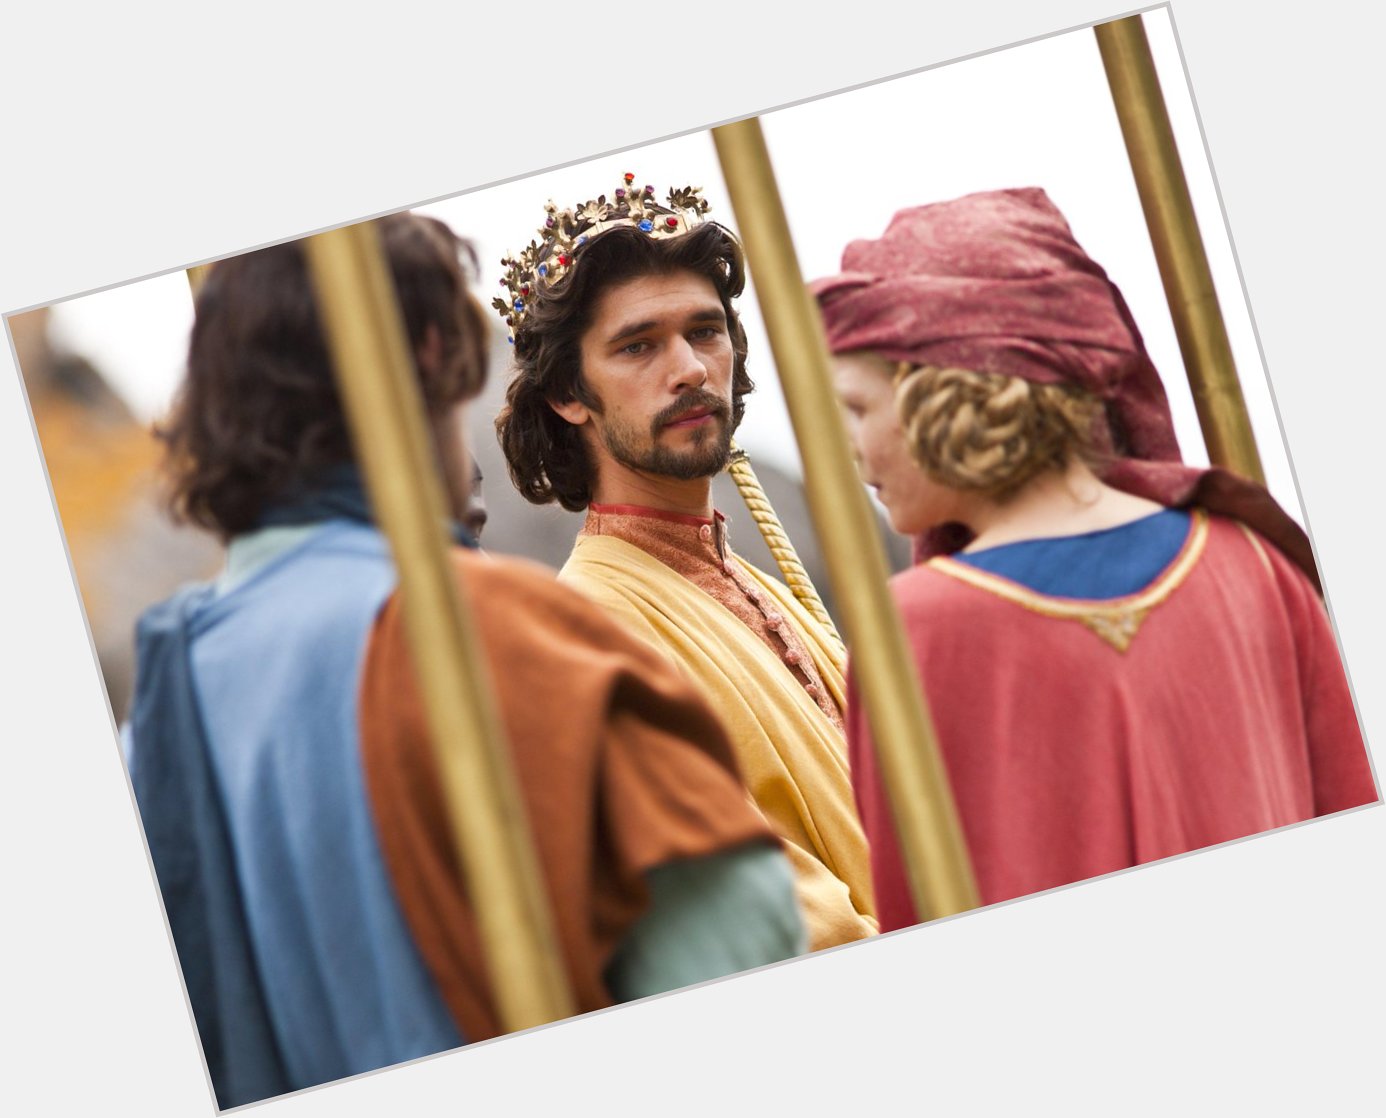 Happy Birthday to Ben Whishaw, our King Richard II in The Hollow Crown! 